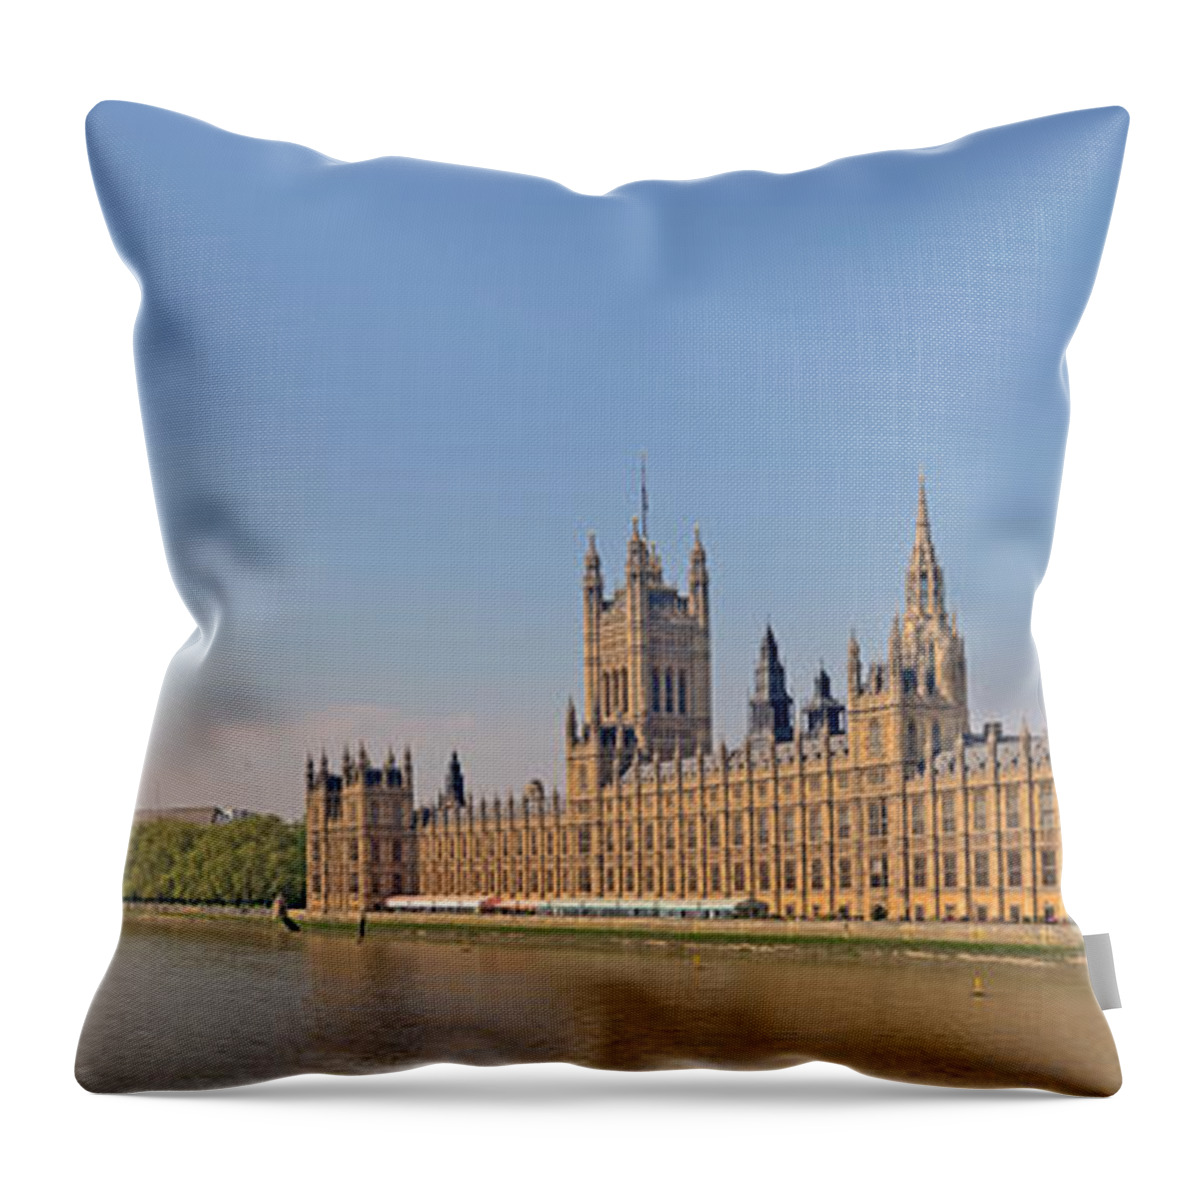 Tranquility Throw Pillow featuring the photograph Palace Of Westminster - London by David Kracht